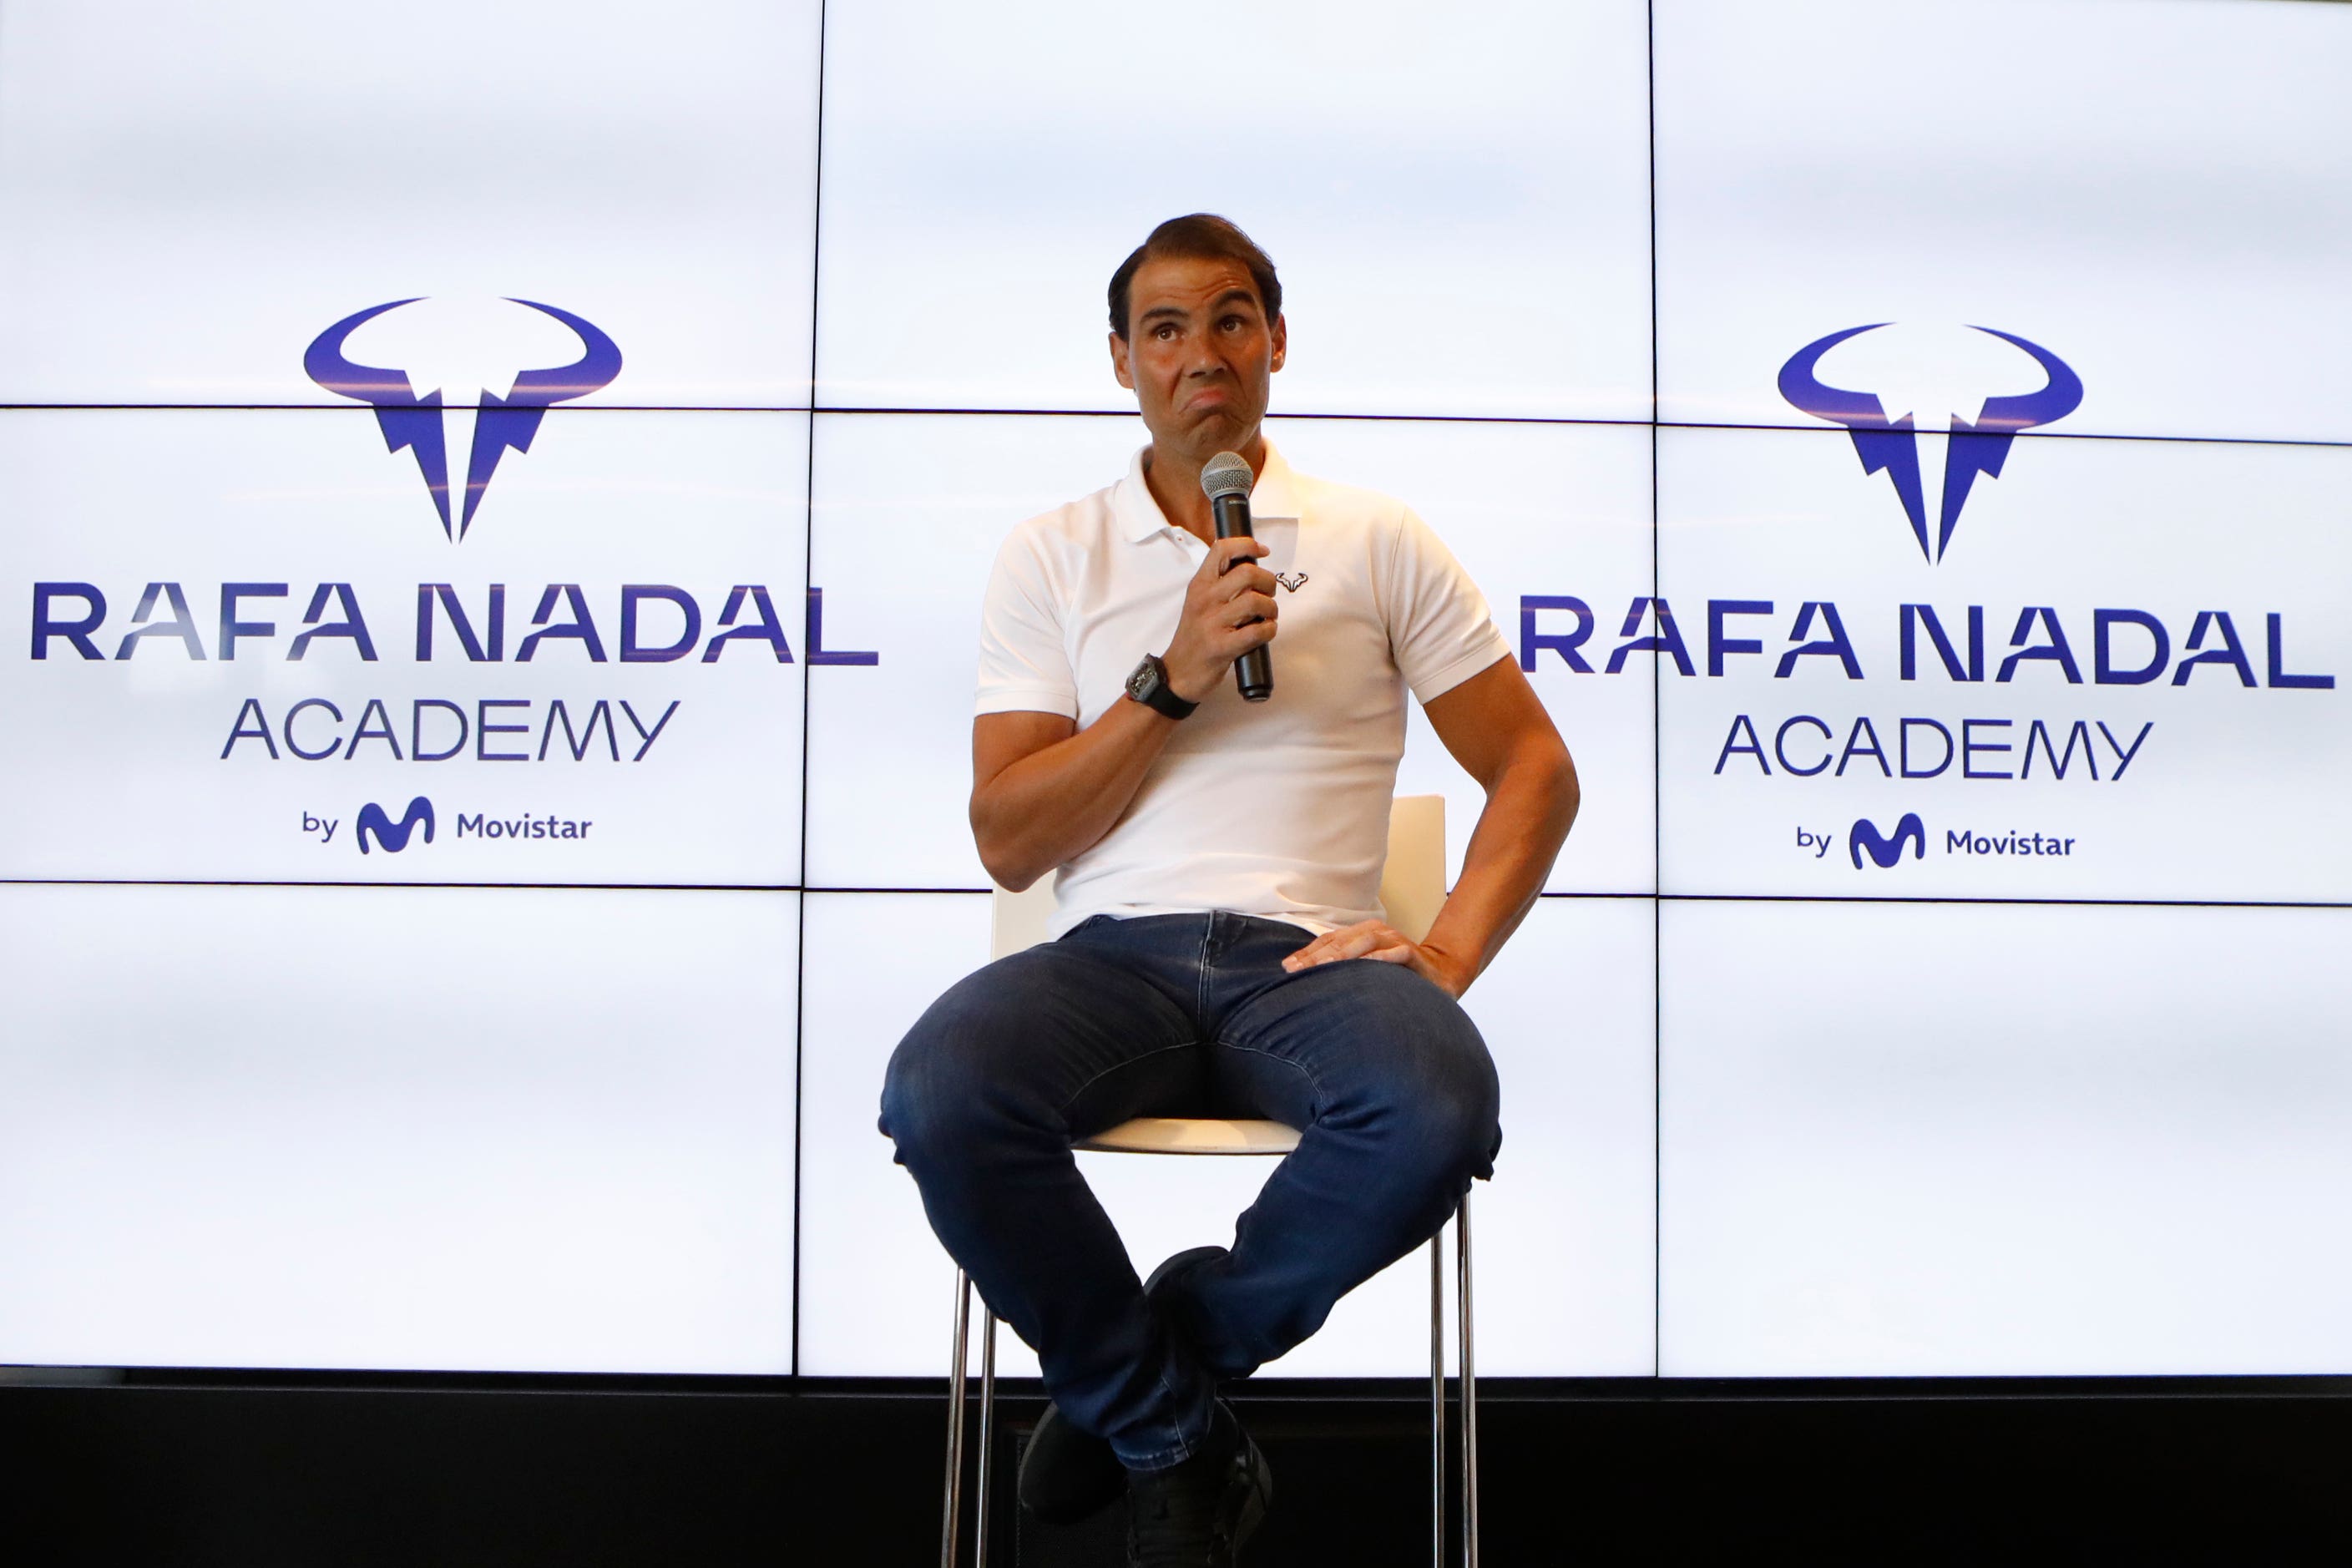 Rafael Nadal speaks during a press conference at his tennis academy in Majorca (Francisco Ubilla/AP)